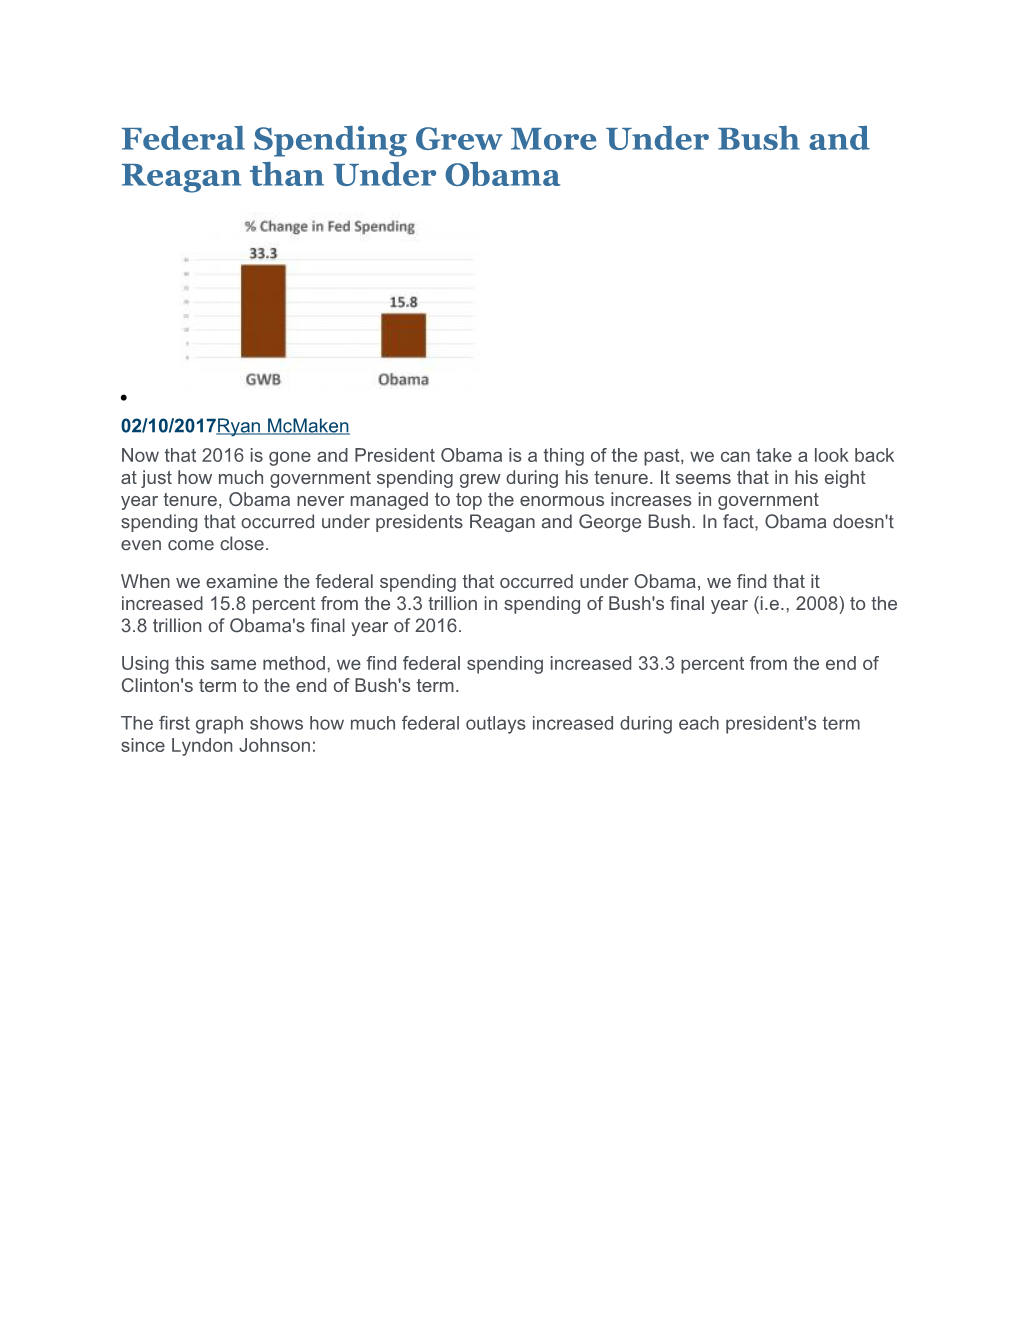 Federal Spending Grew More Under Bush and Reagan Than Under Obama